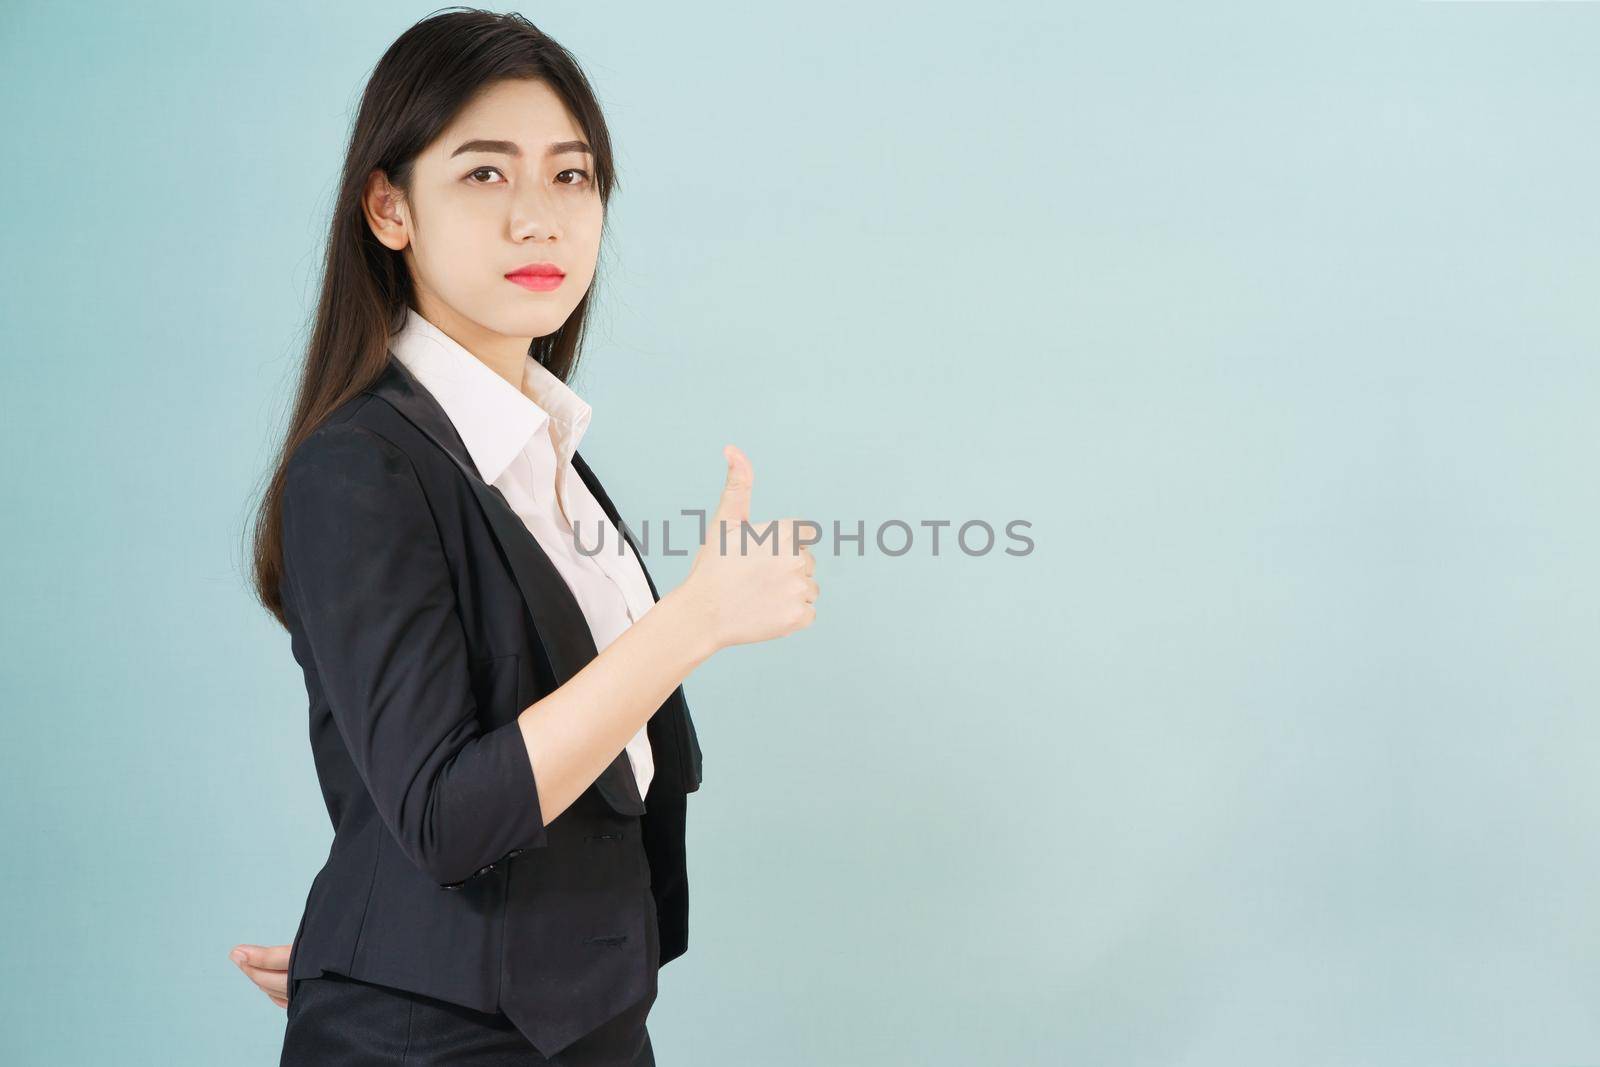 Asian business women in suit and thump up hand sign